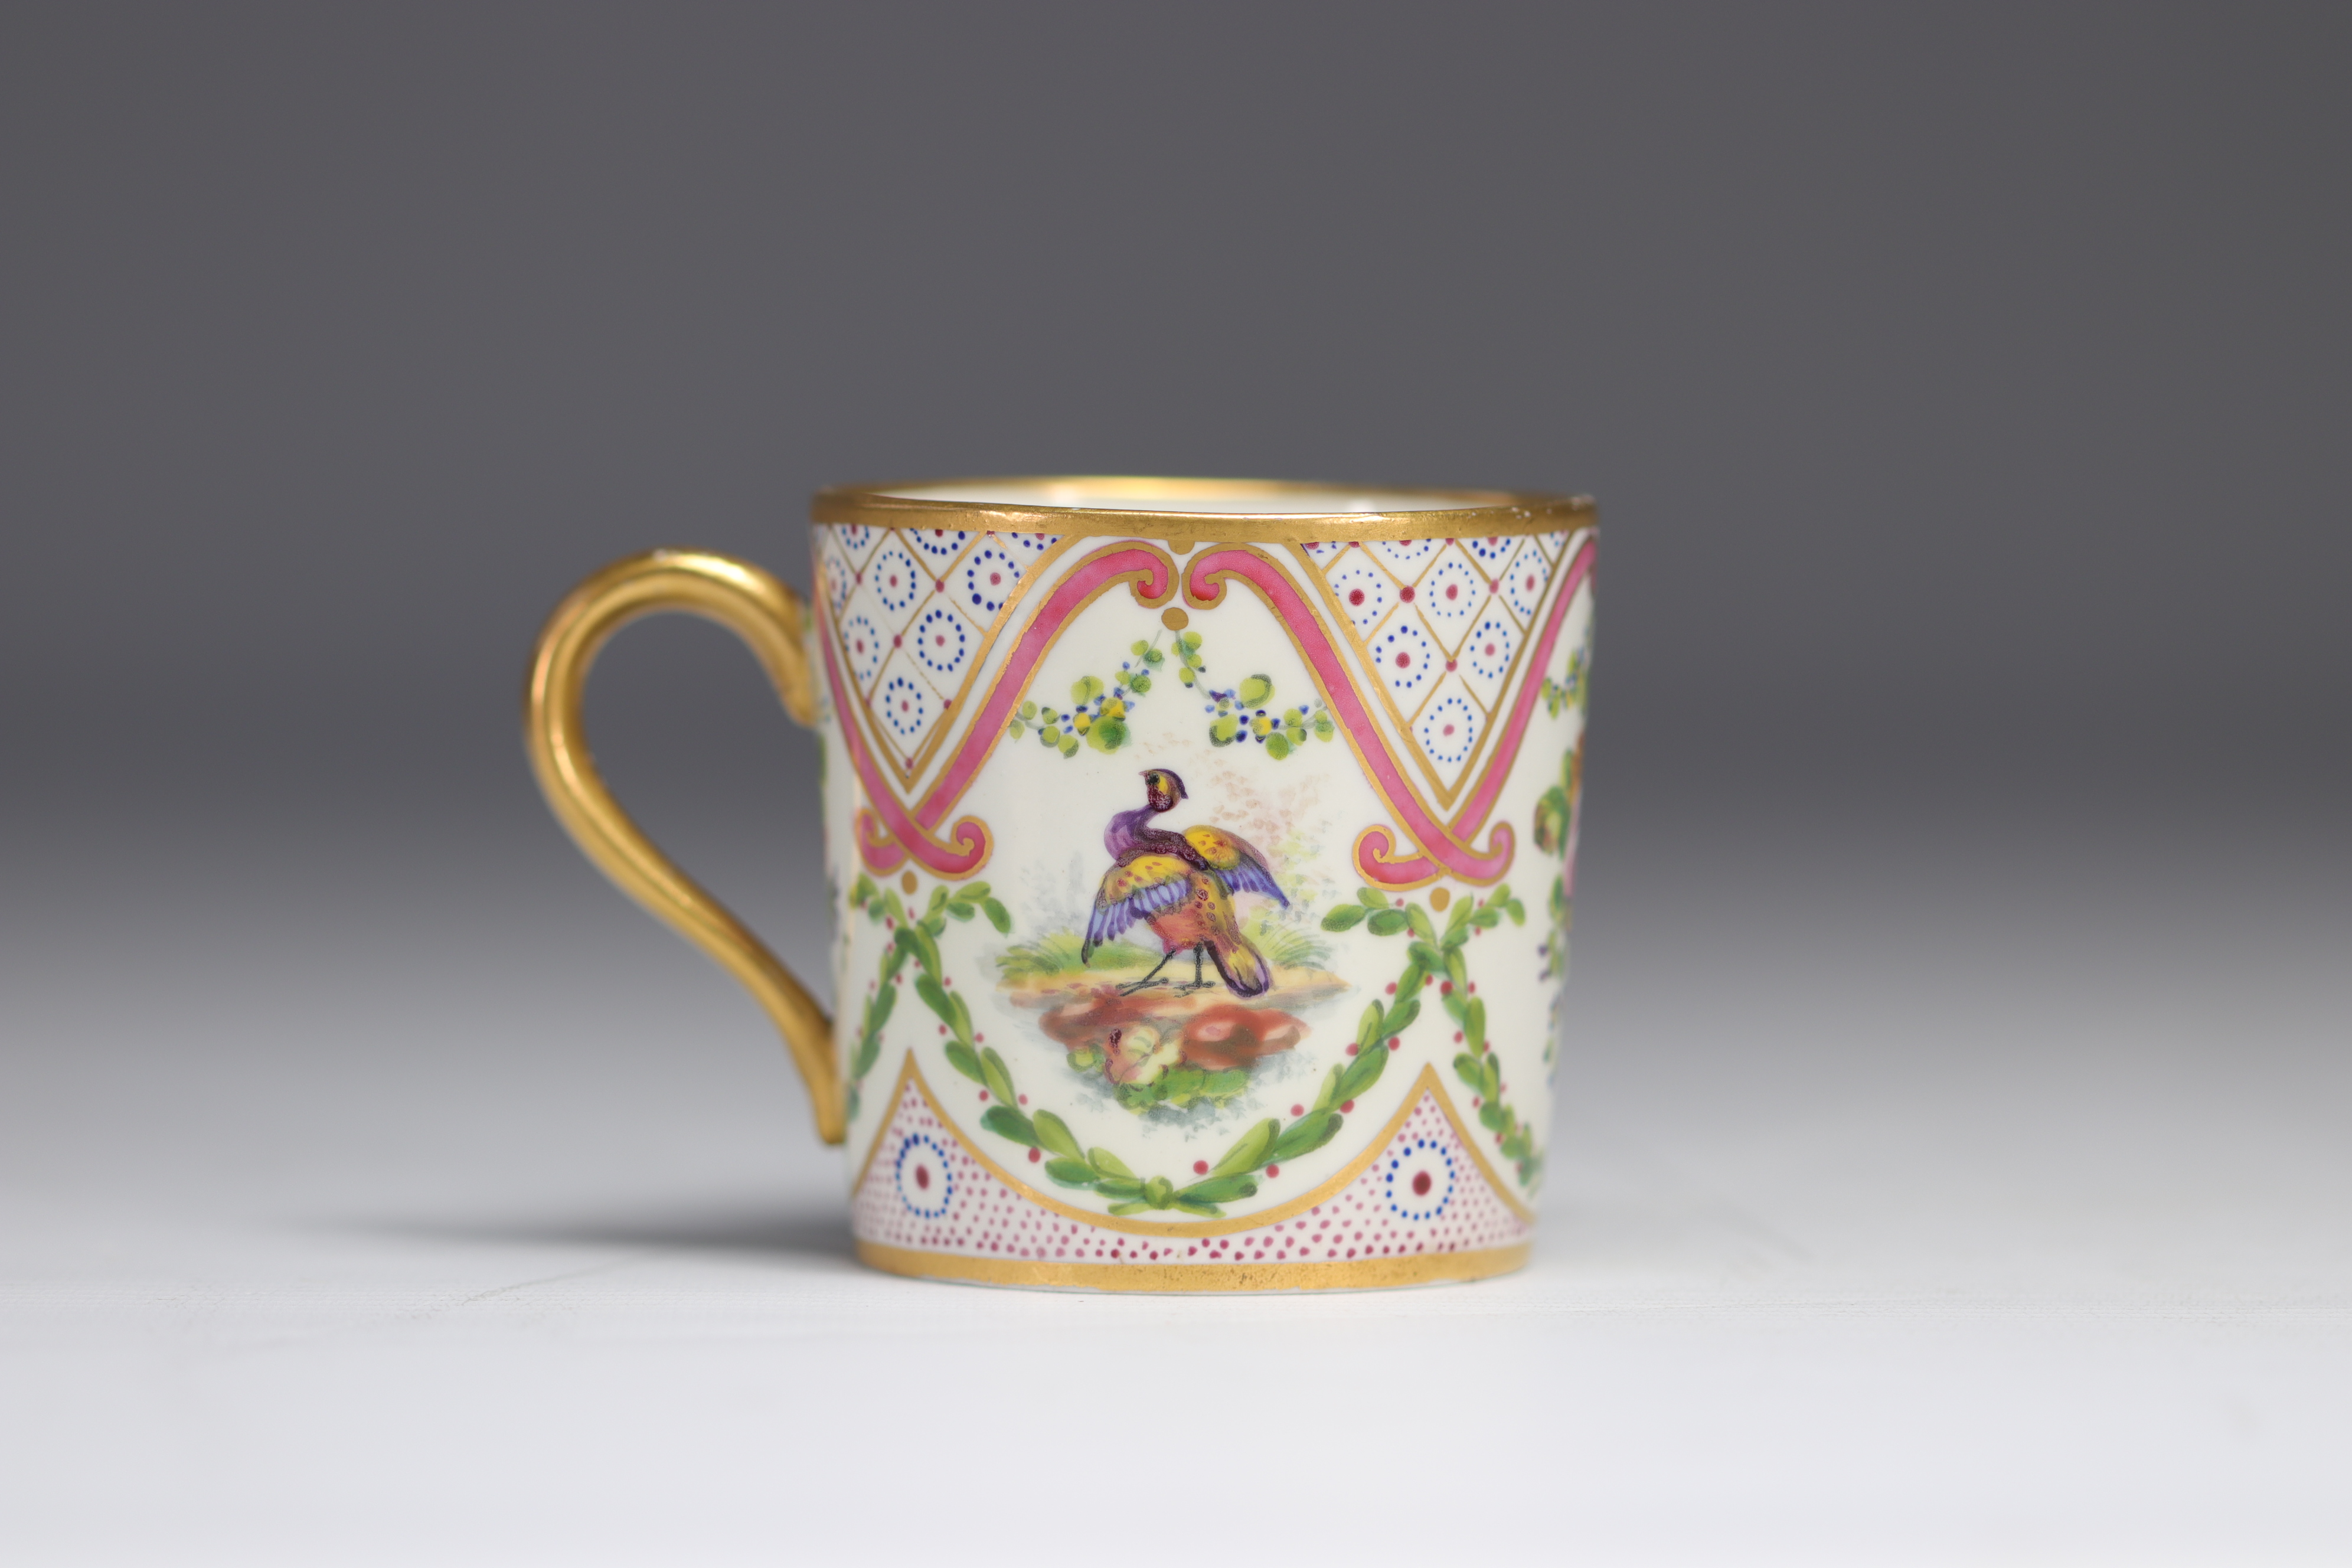 Porcelain "cup and saucer" decorated with birds and flowers from Tournai (Belgium) from 18th century - Image 3 of 7